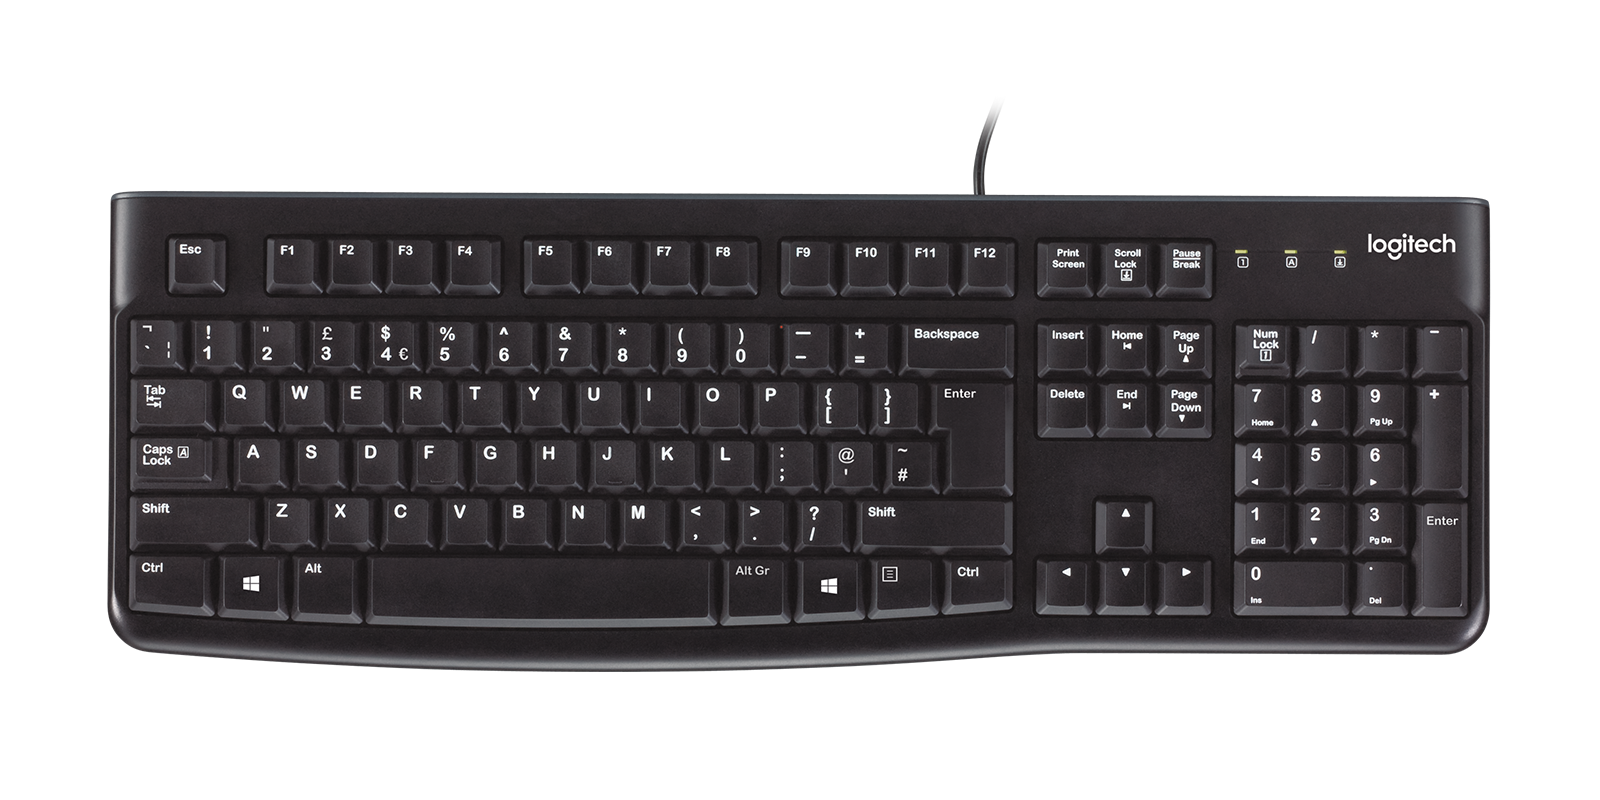 LO-920-002479 You can type comfortably with the Logitech K120 keyboard. The keys are easy to press, so you can type comfortably.